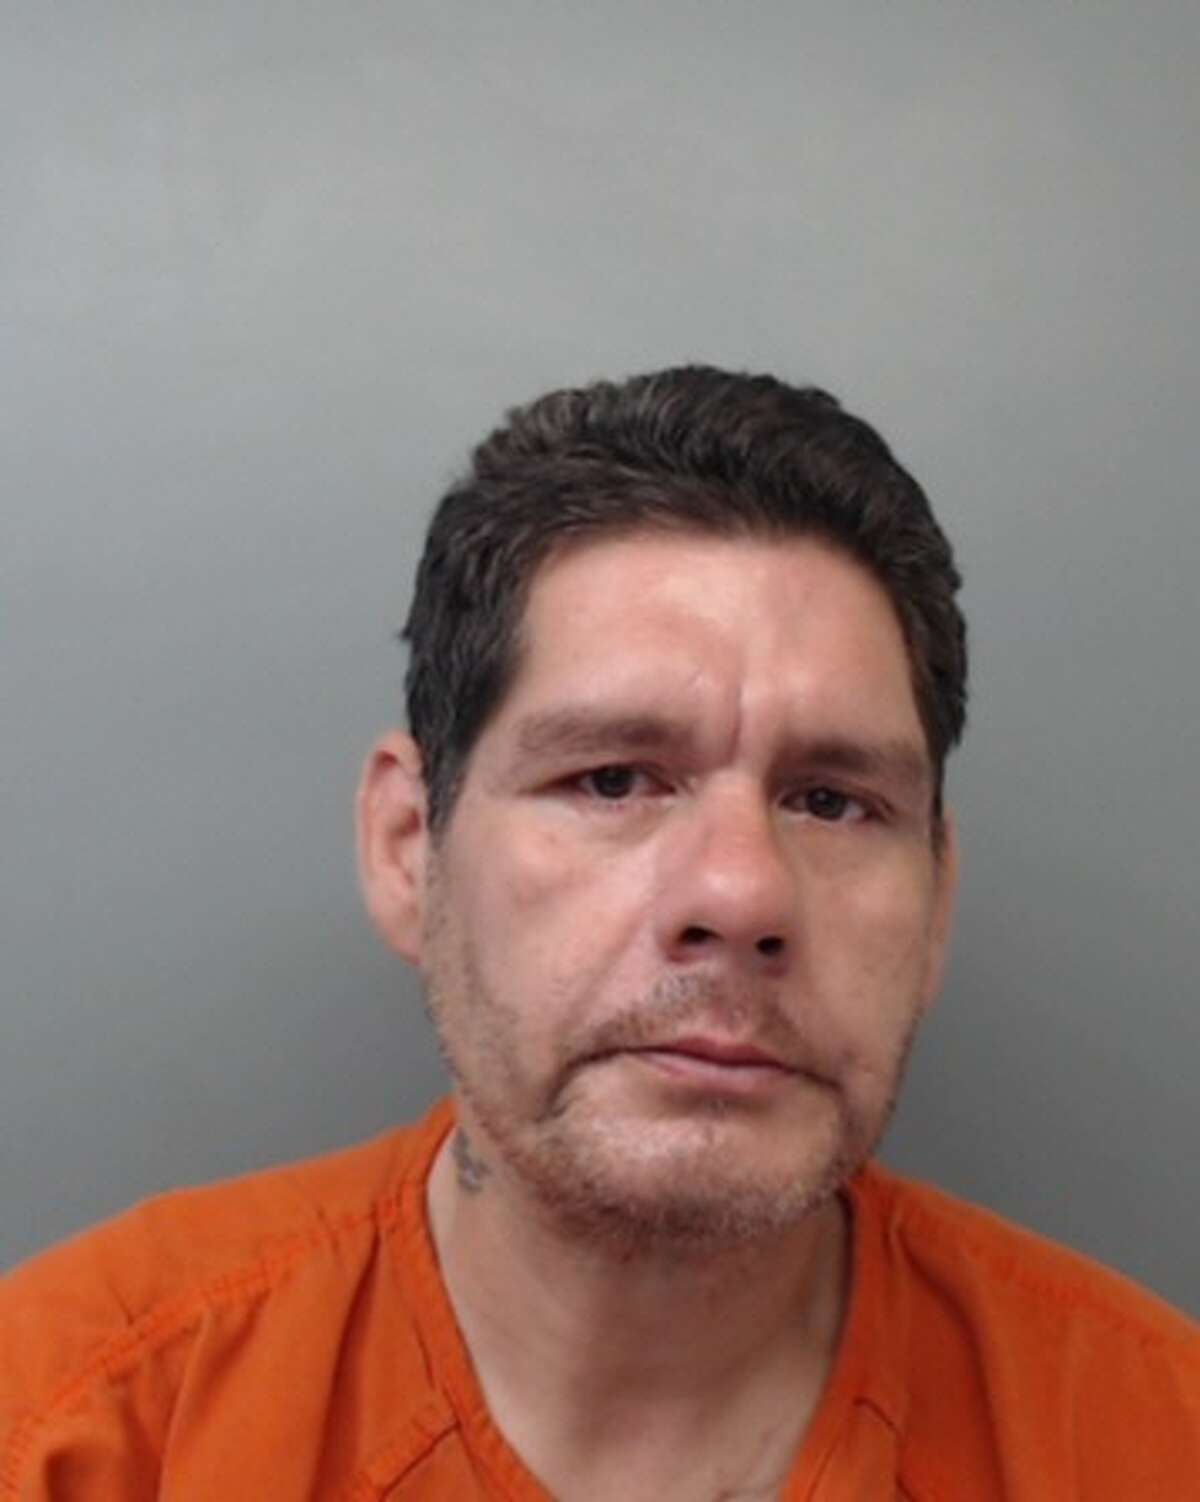 Hector Luis Caballero, 46, was served with an arrest warrant charging him with theft of property with two or more previous convictions.